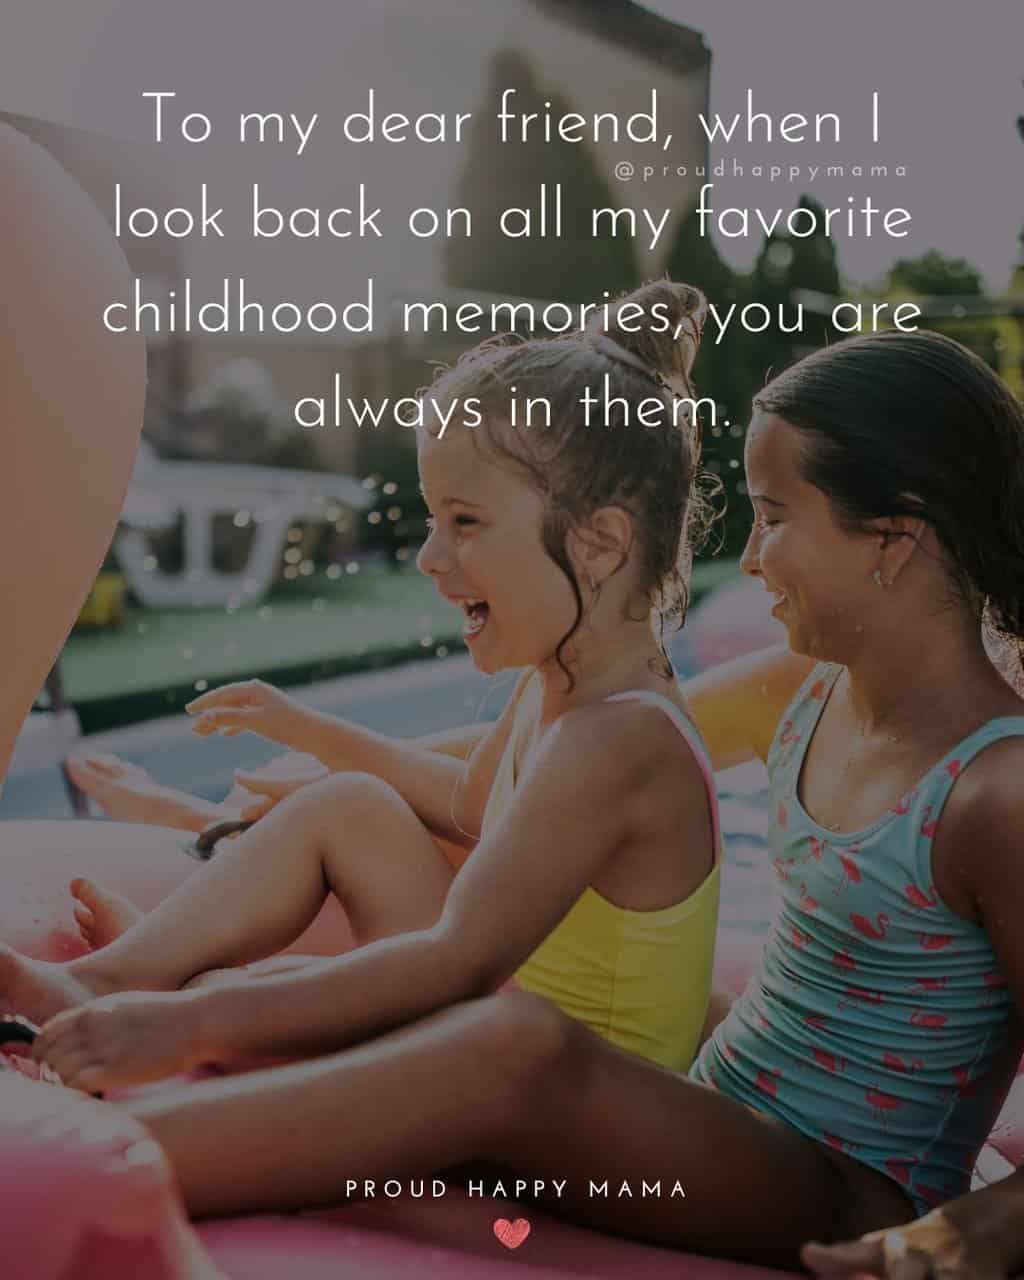 Two young girls on water slide laughing with quotes about childhood friendship text overlay. ‘To my dear friend, when I look back on all my favorite childhood memories, you are always in them.’